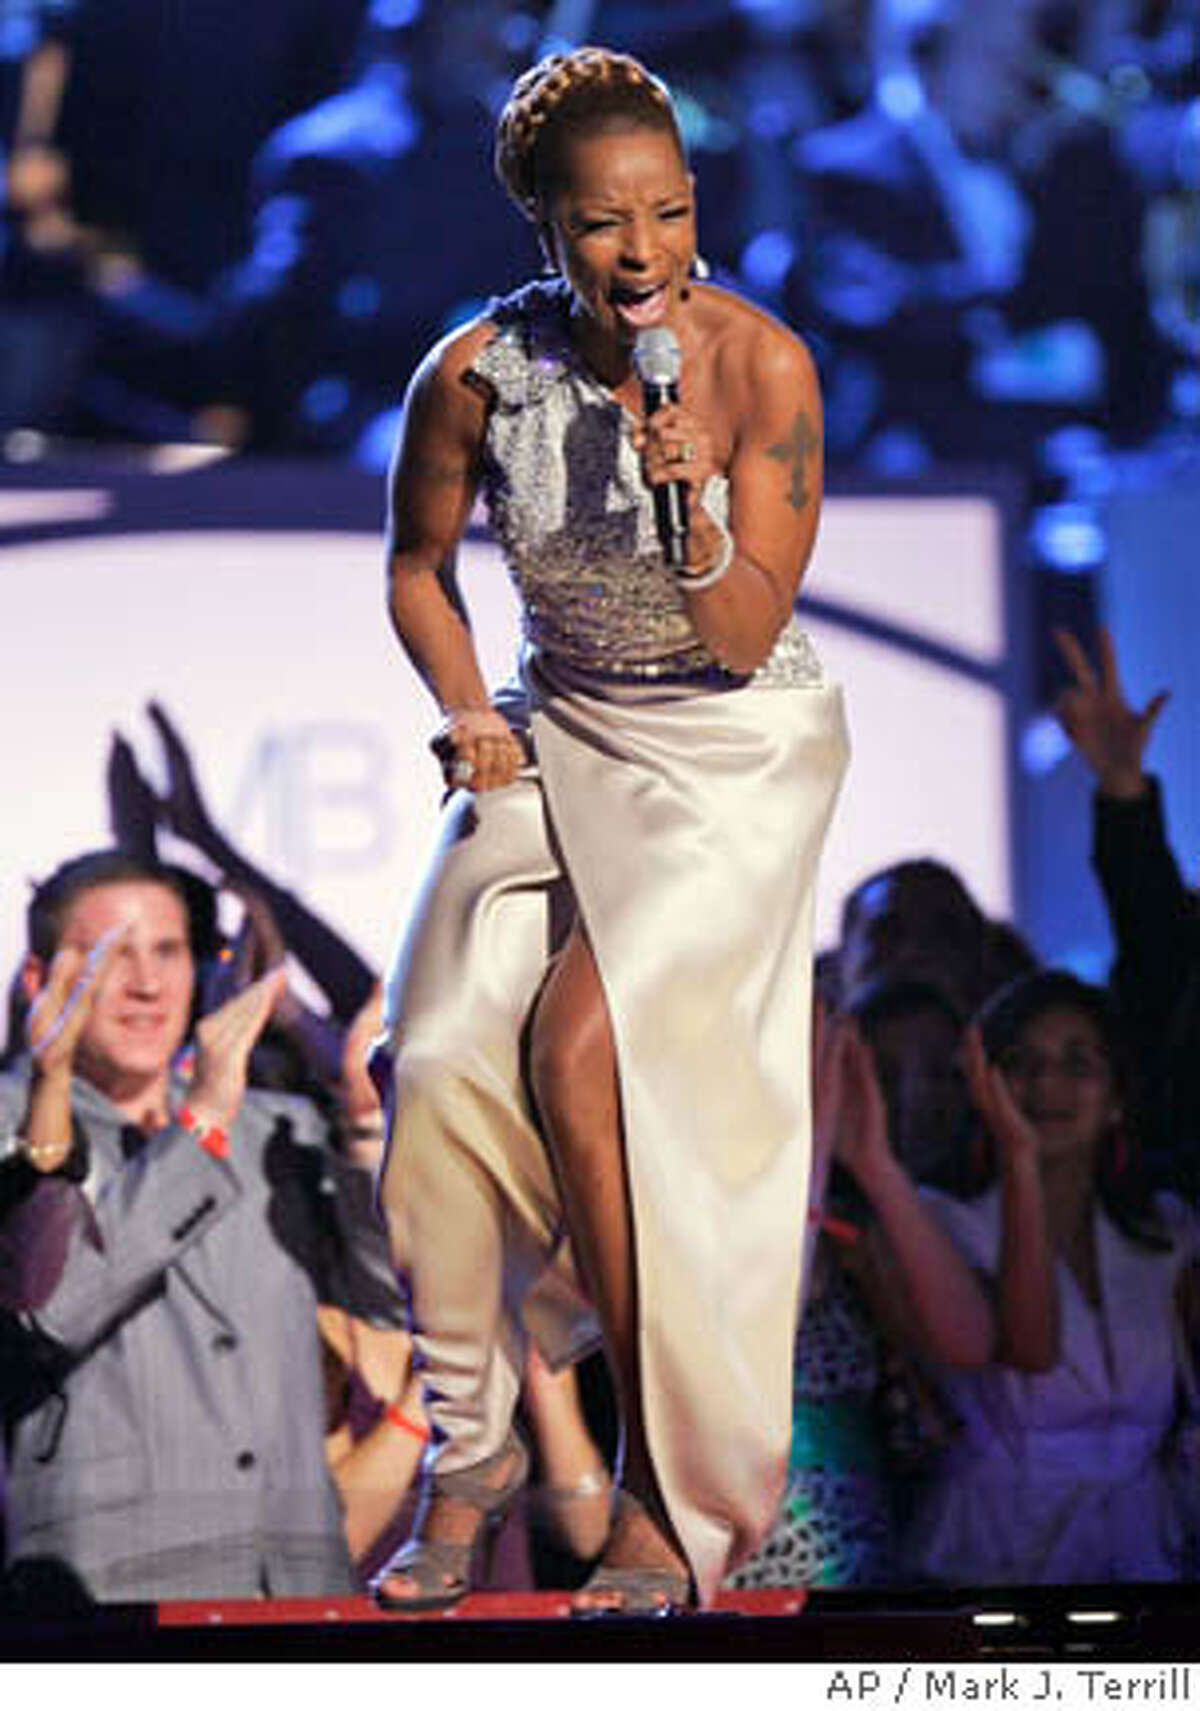 The 49th Grammy Awards Mary J Blige Dixie Chicks Triumph At A Grammys Once Again Stuck In